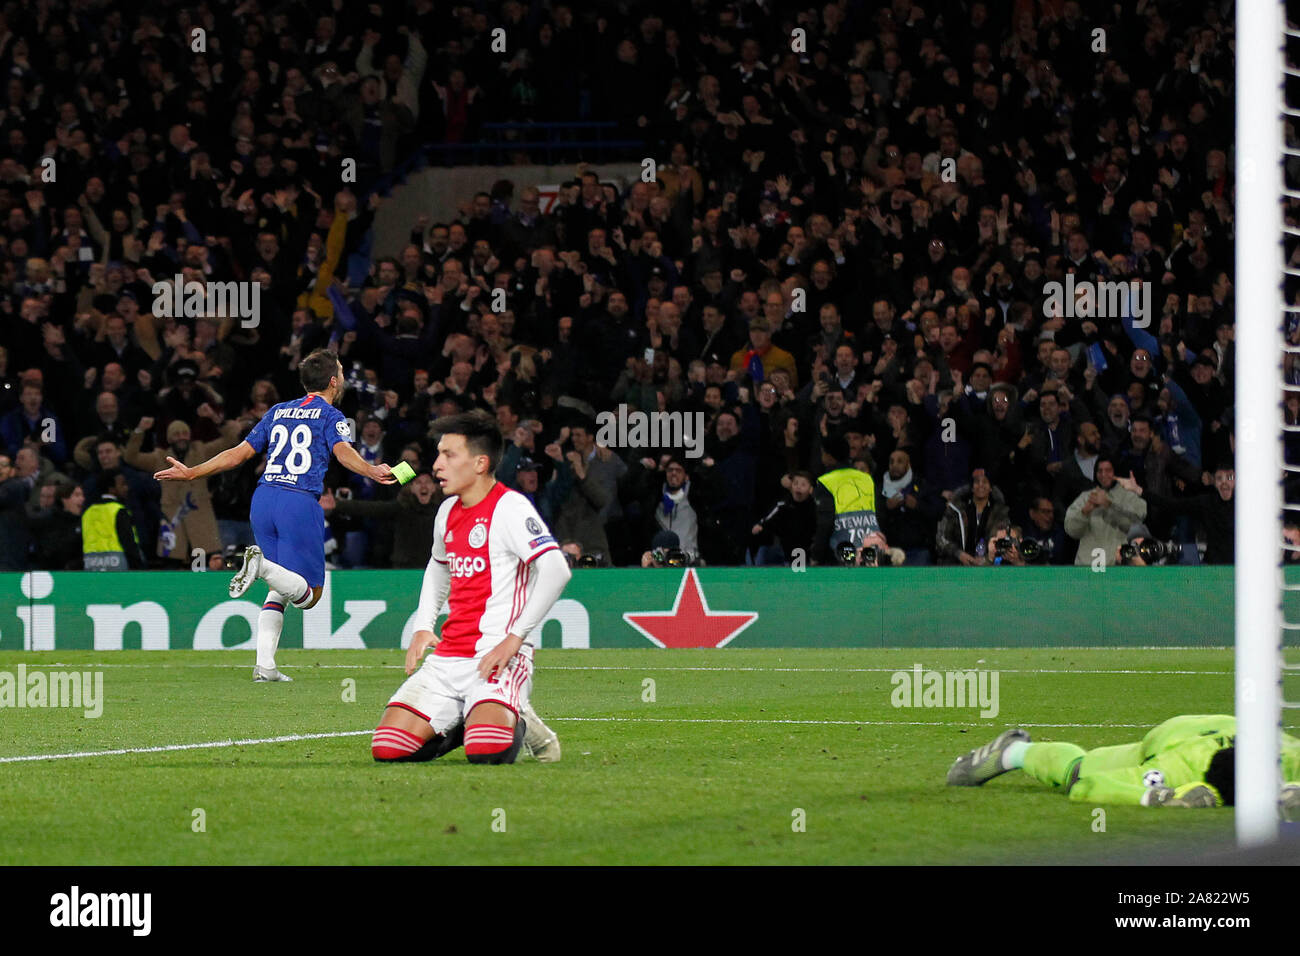 London, UK. 05th Nov, 2019. GOAL - Csar Azpilicueta of Chelsea levels the score at 4-4 during the UEFA Champions League group match between Chelsea and Ajax at Stamford Bridge, London, England on 5 November 2019. Photo by Carlton Myrie/PRiME Media Images. Credit: PRiME Media Images/Alamy Live News Stock Photo